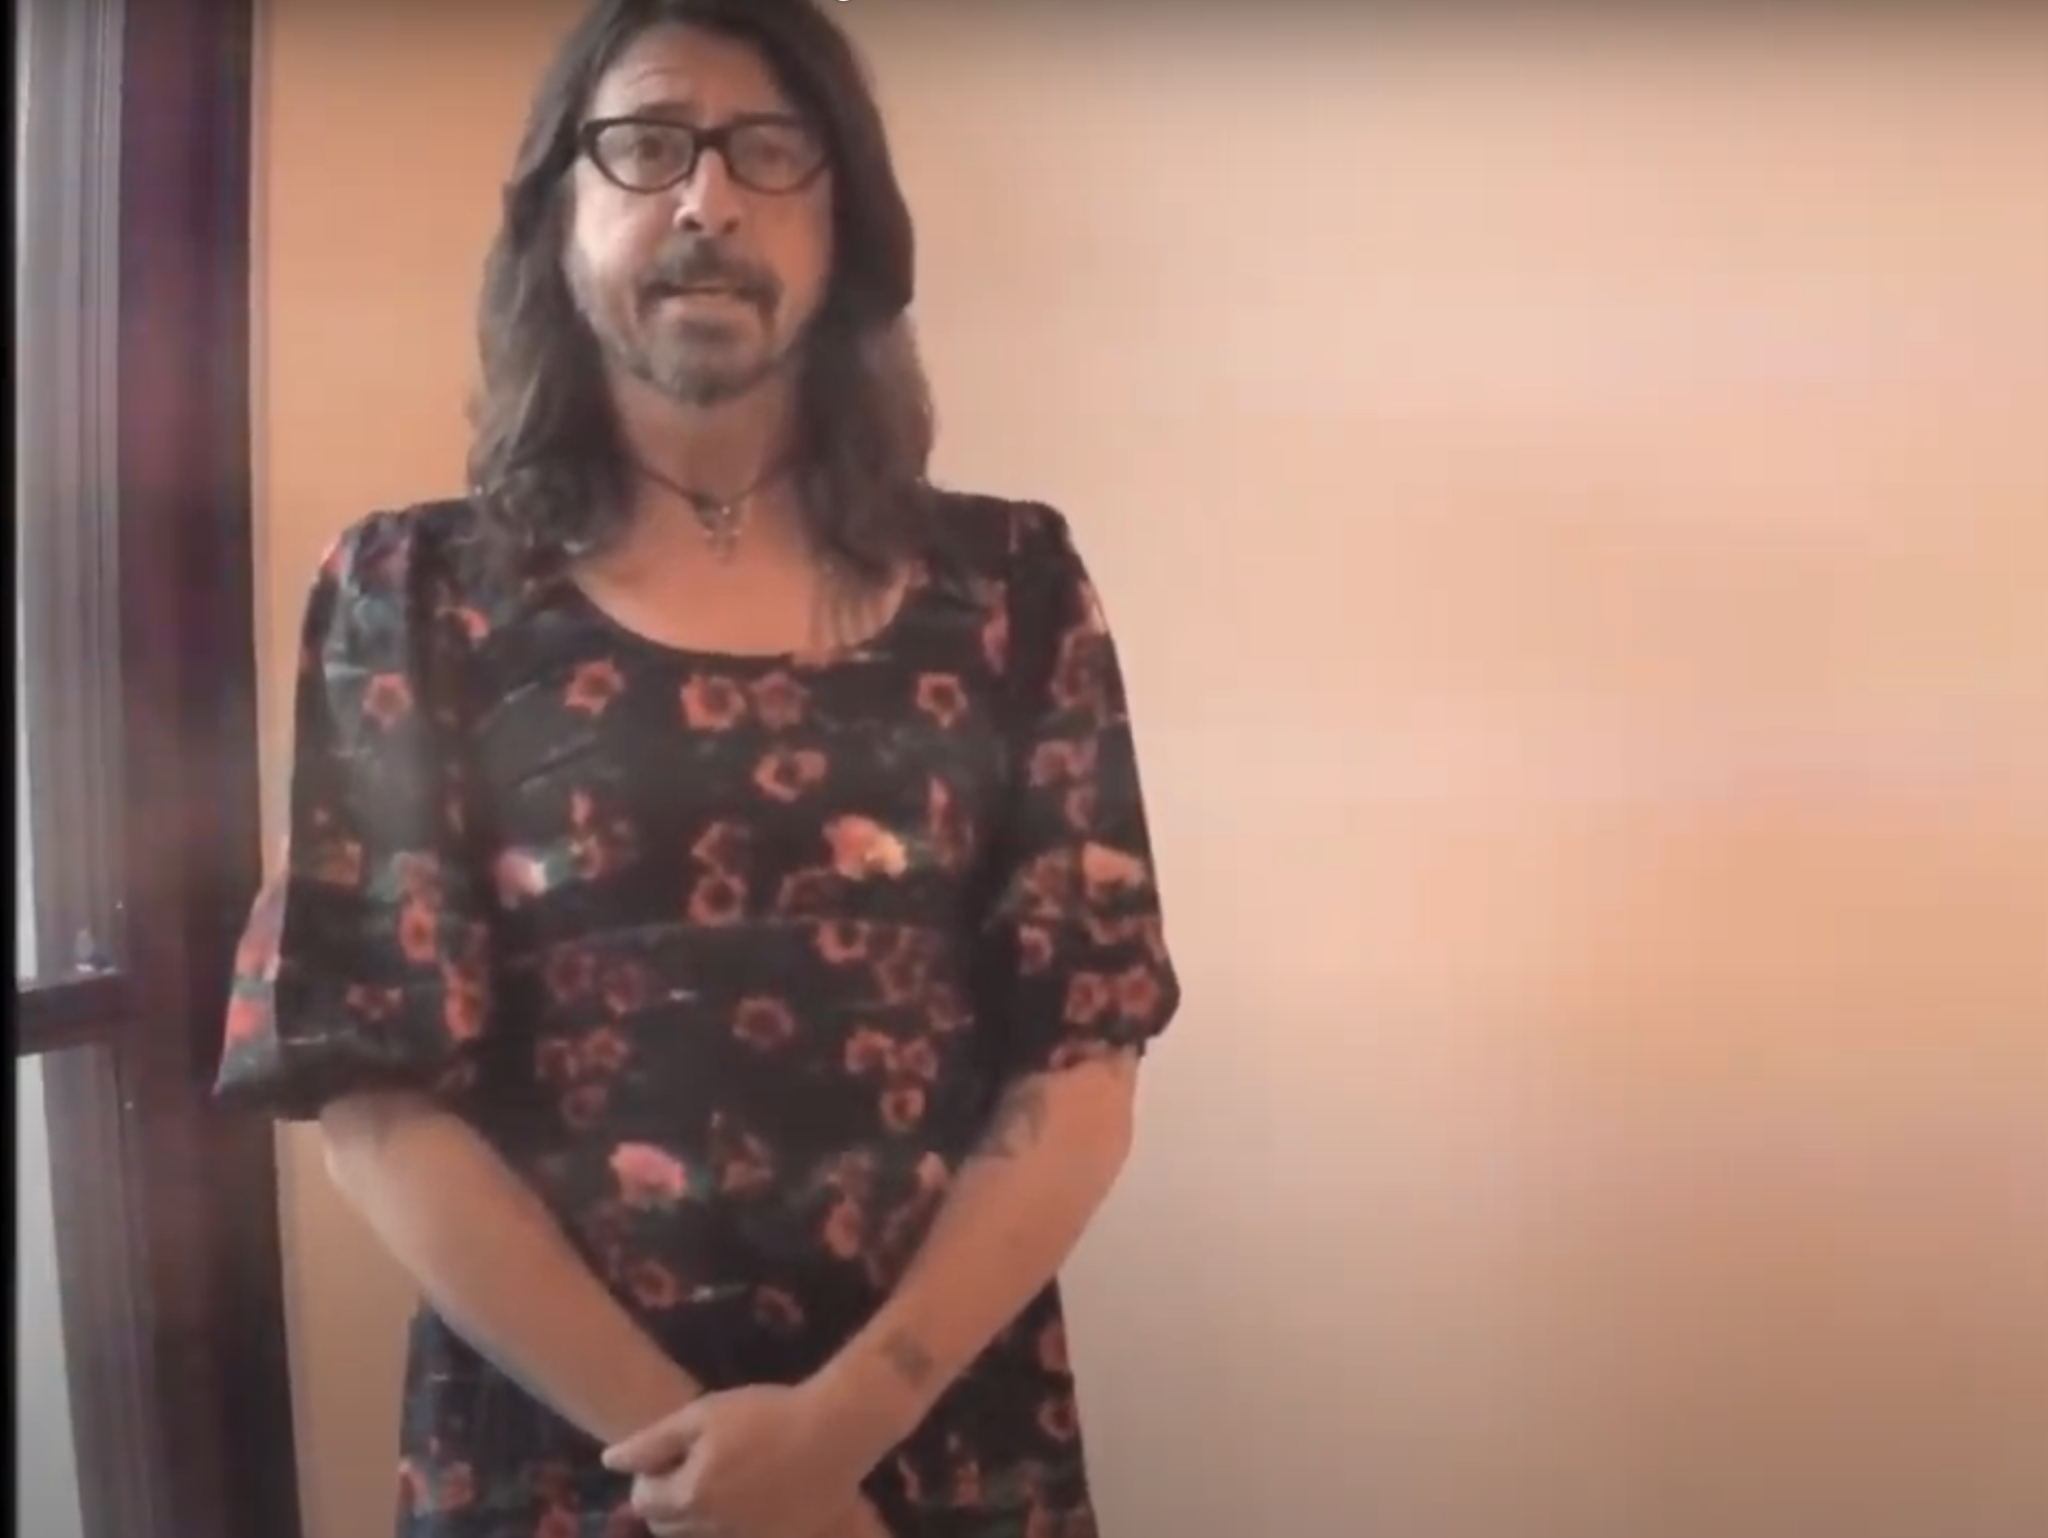 Enjoy Dave Grohl's 'Hanukkah Sessions'